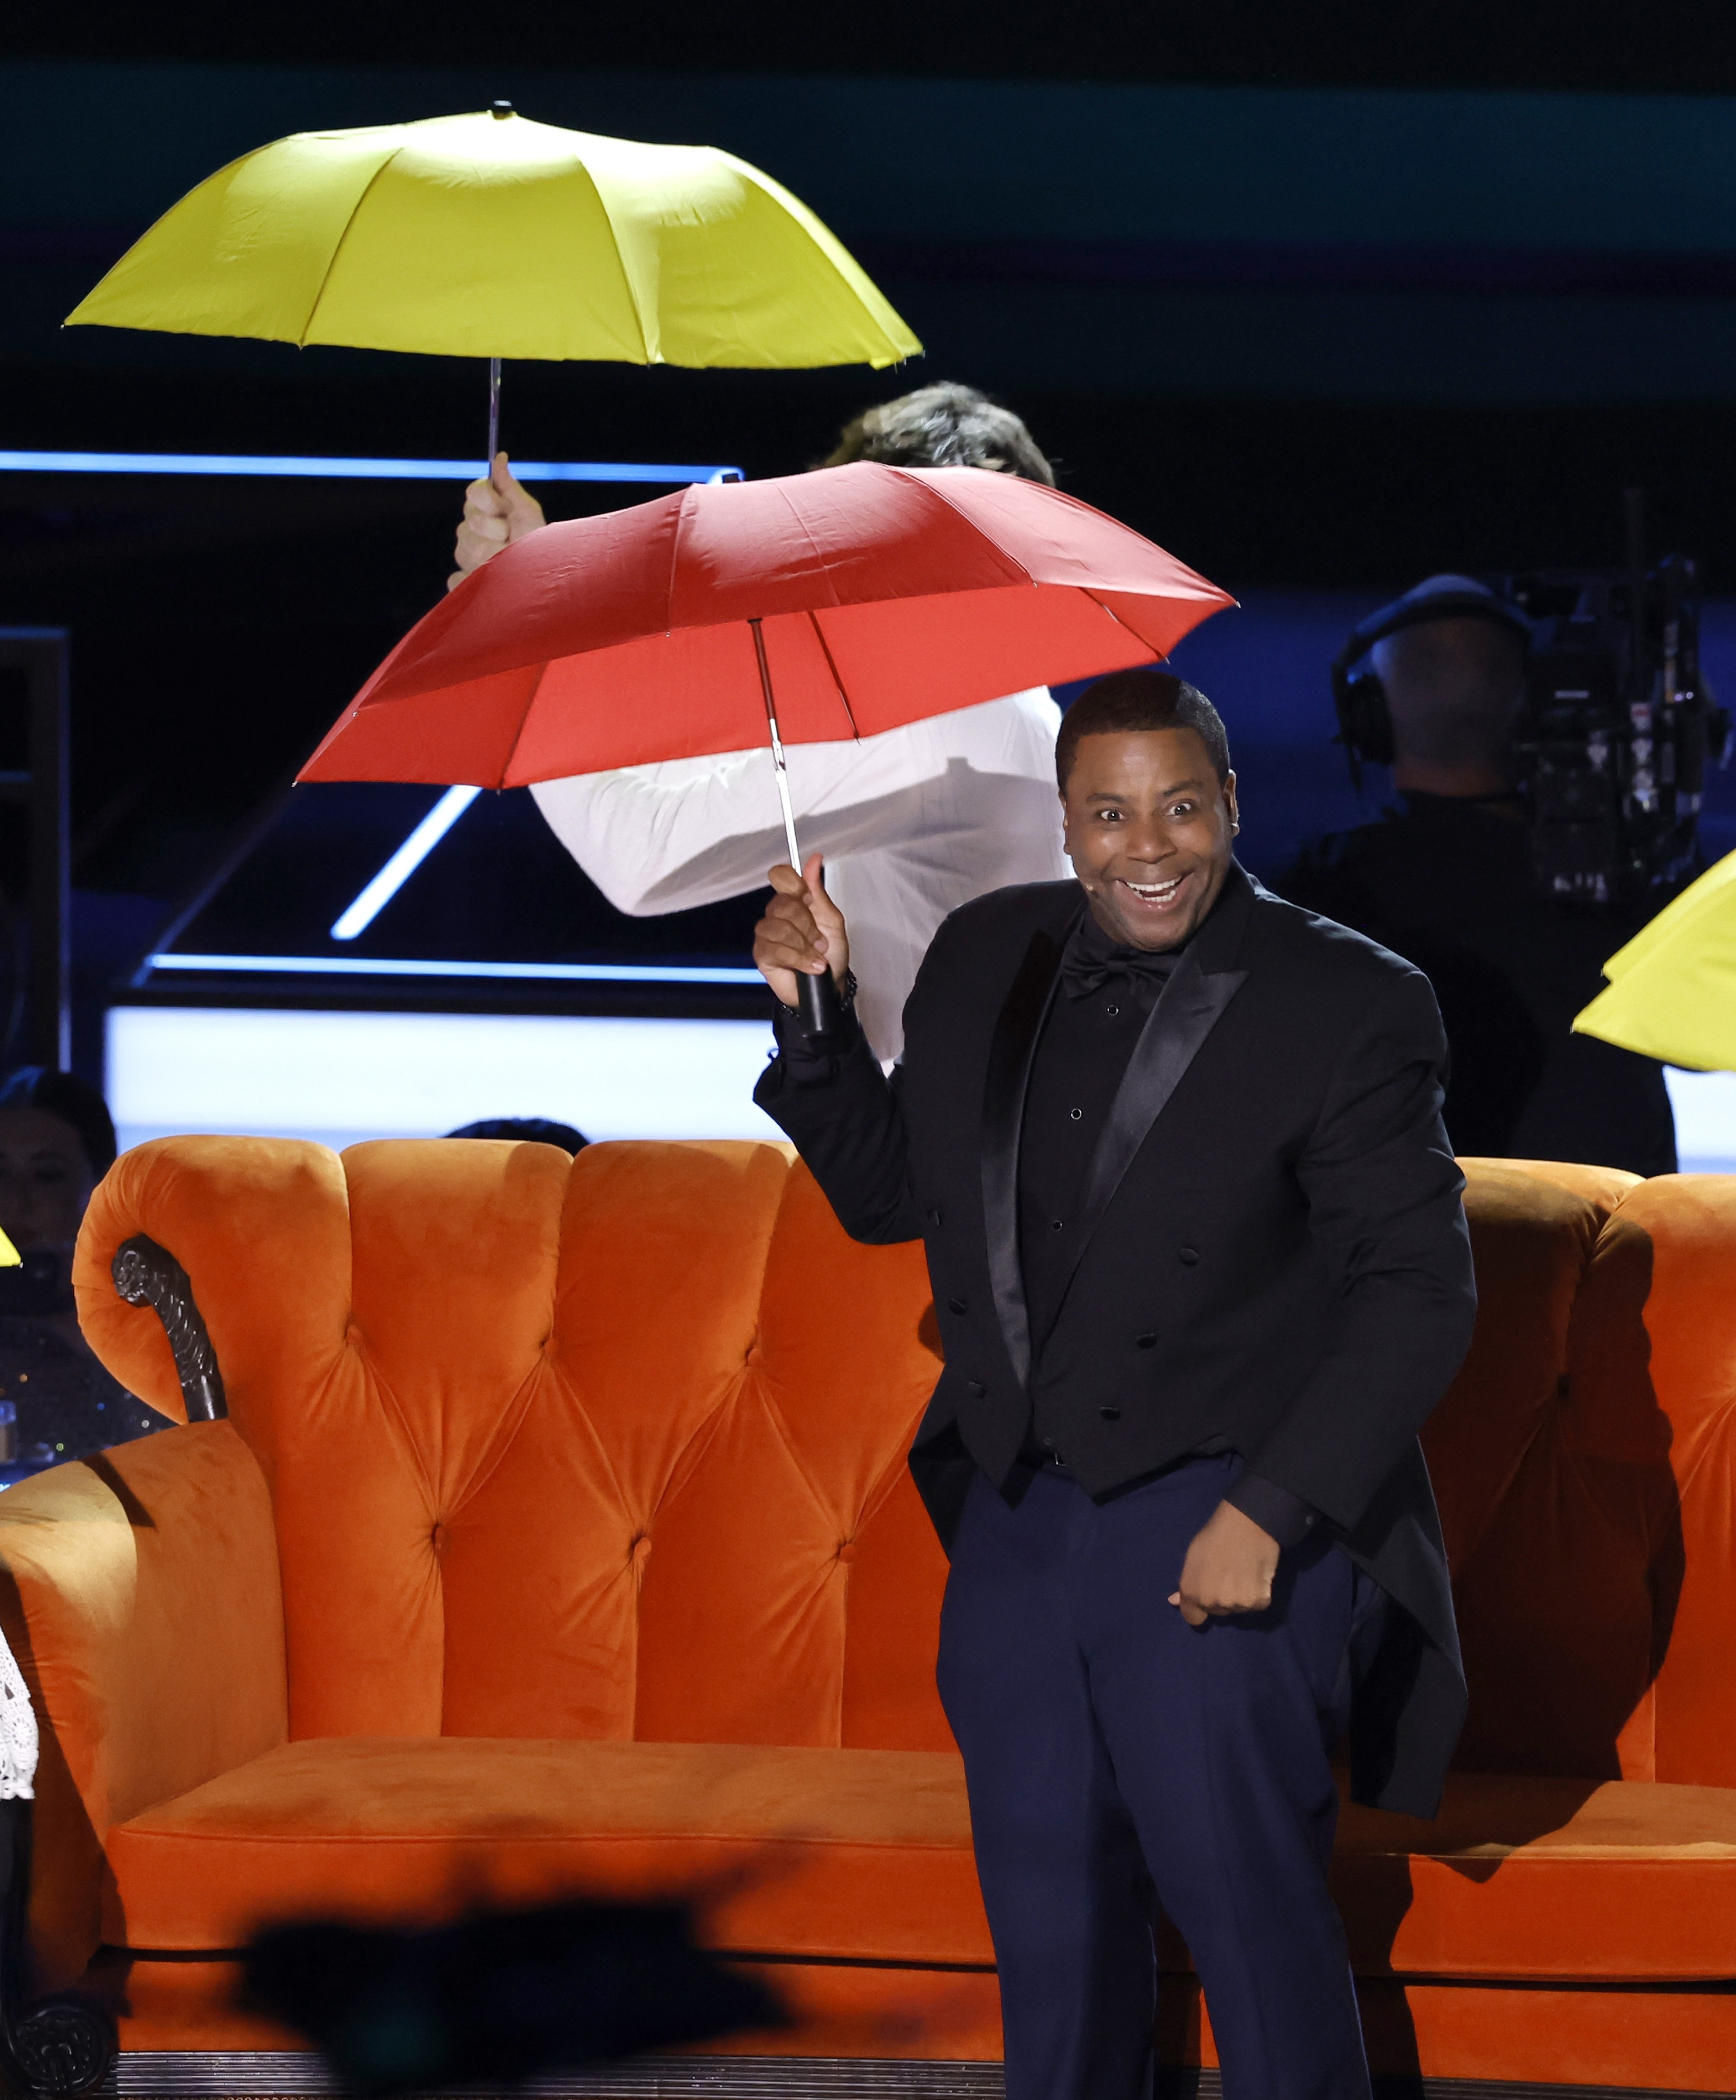 Criticism rained down on Kenan Thompson and the production crew when he hosted